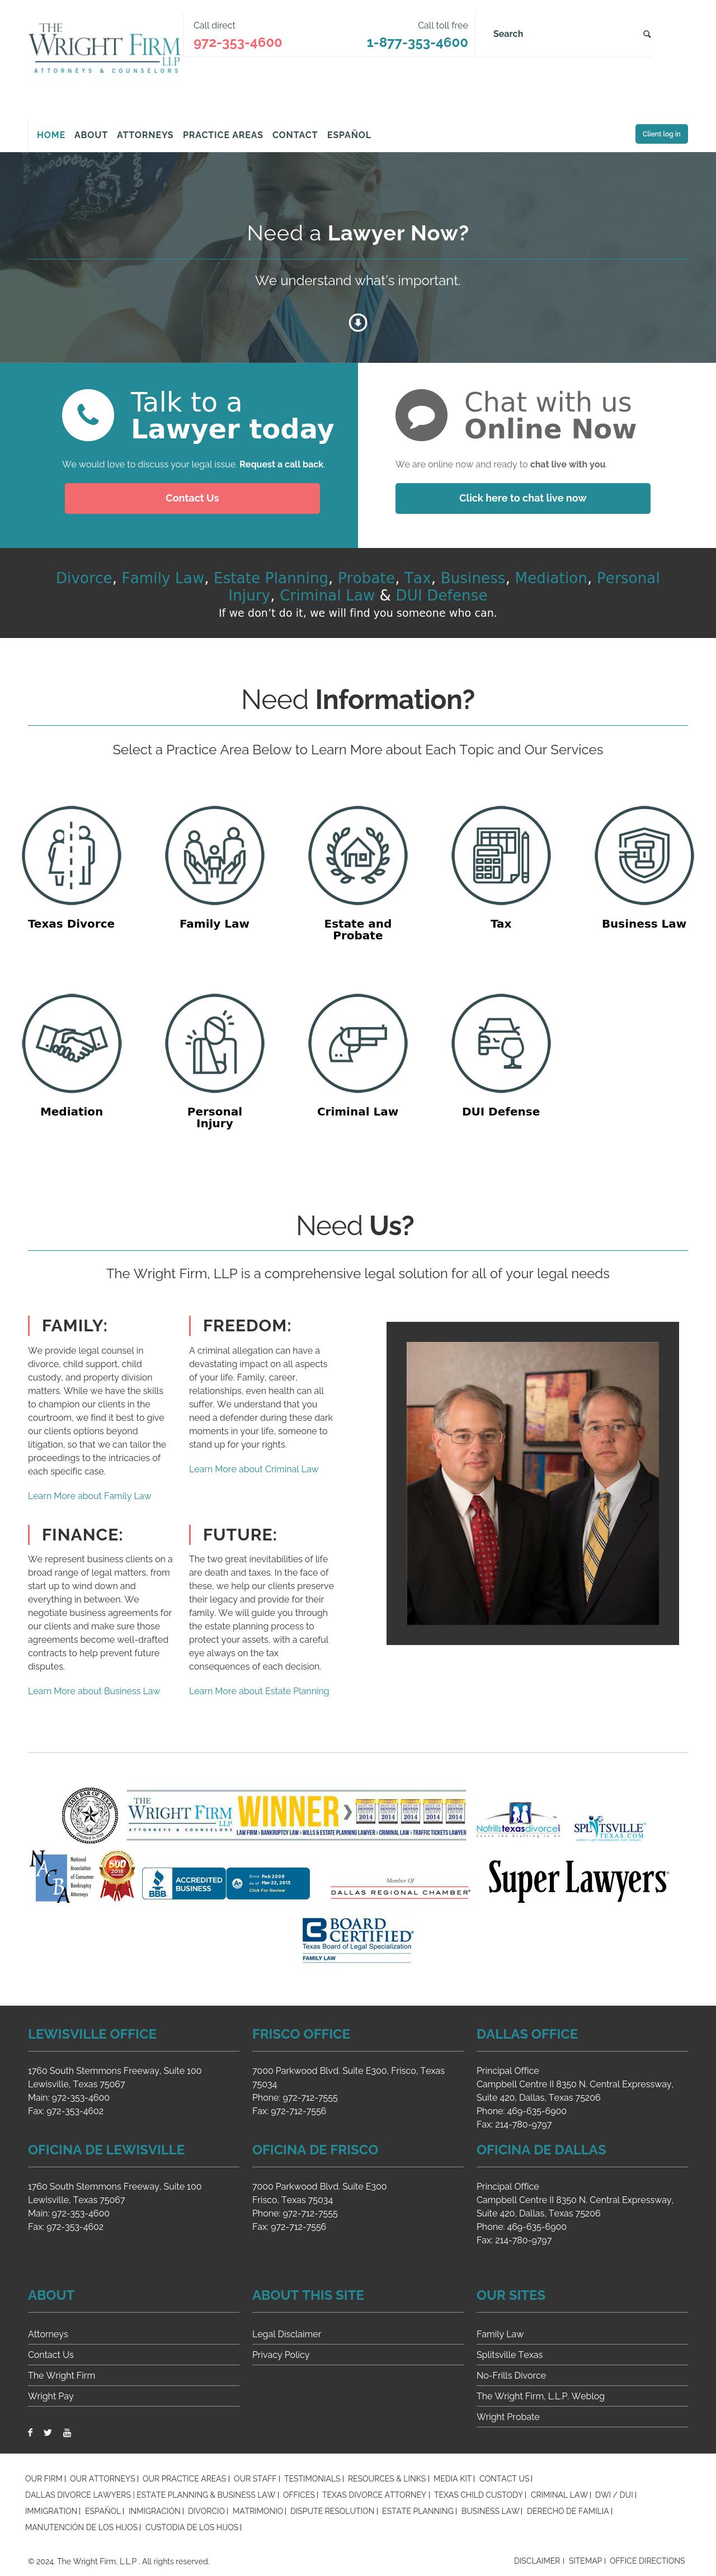 The Wright Firm, LLP - Dallas TX Lawyers